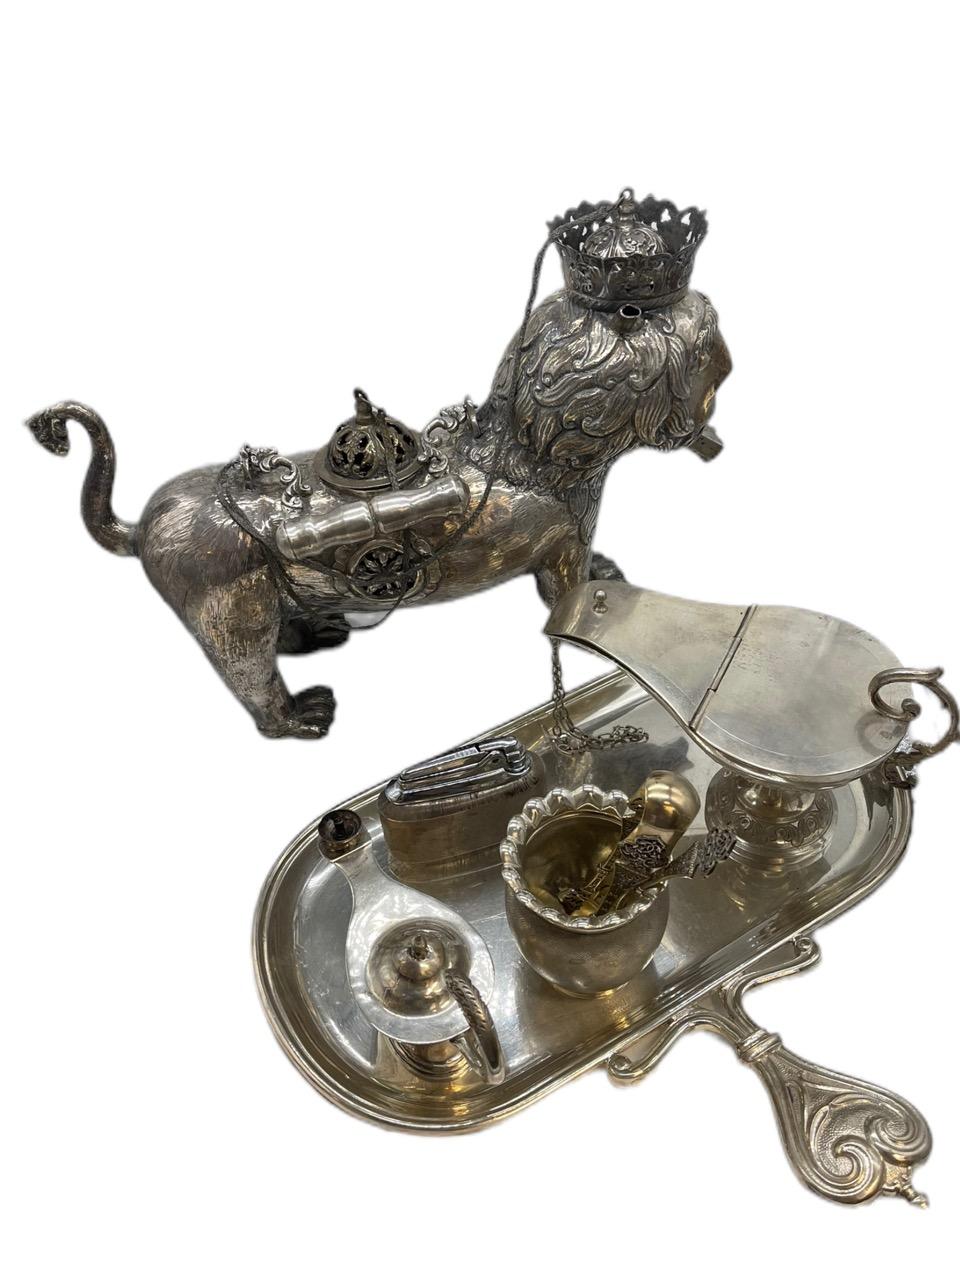 Early 19th Century (1830) Crowned Lion of Judah shaped censer made of 800-silver by Candido Silva in Buenos Aires for the Bishop Mariano Medrano y Cabrera. 9.5H x 14W x 4D (inch)

Early 19th Century Spanish Colonial Silver oil lamp with lion motif